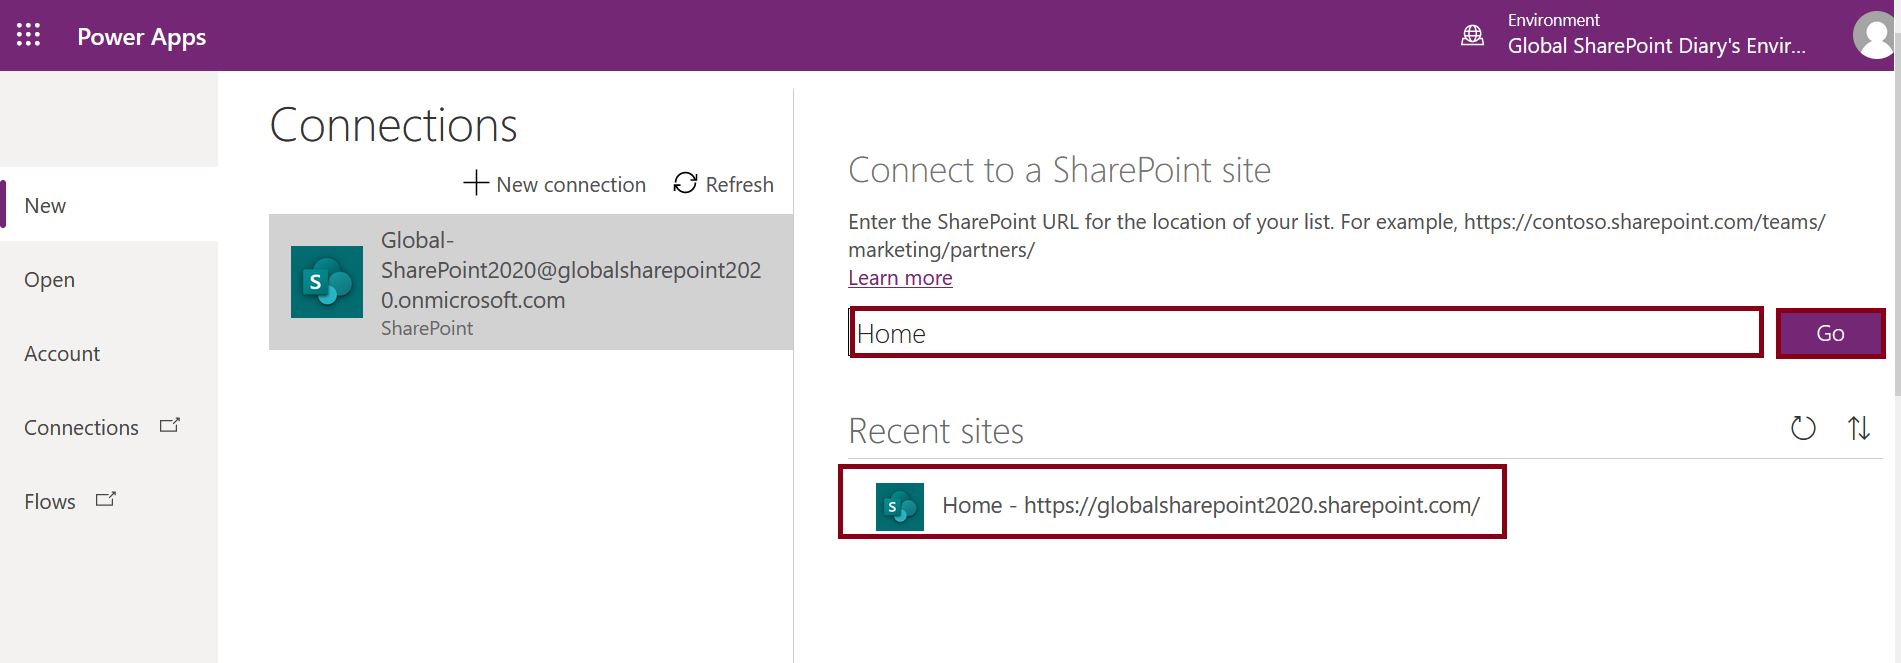 Connect to a SharePoint Site for model-driven app in Power Apps